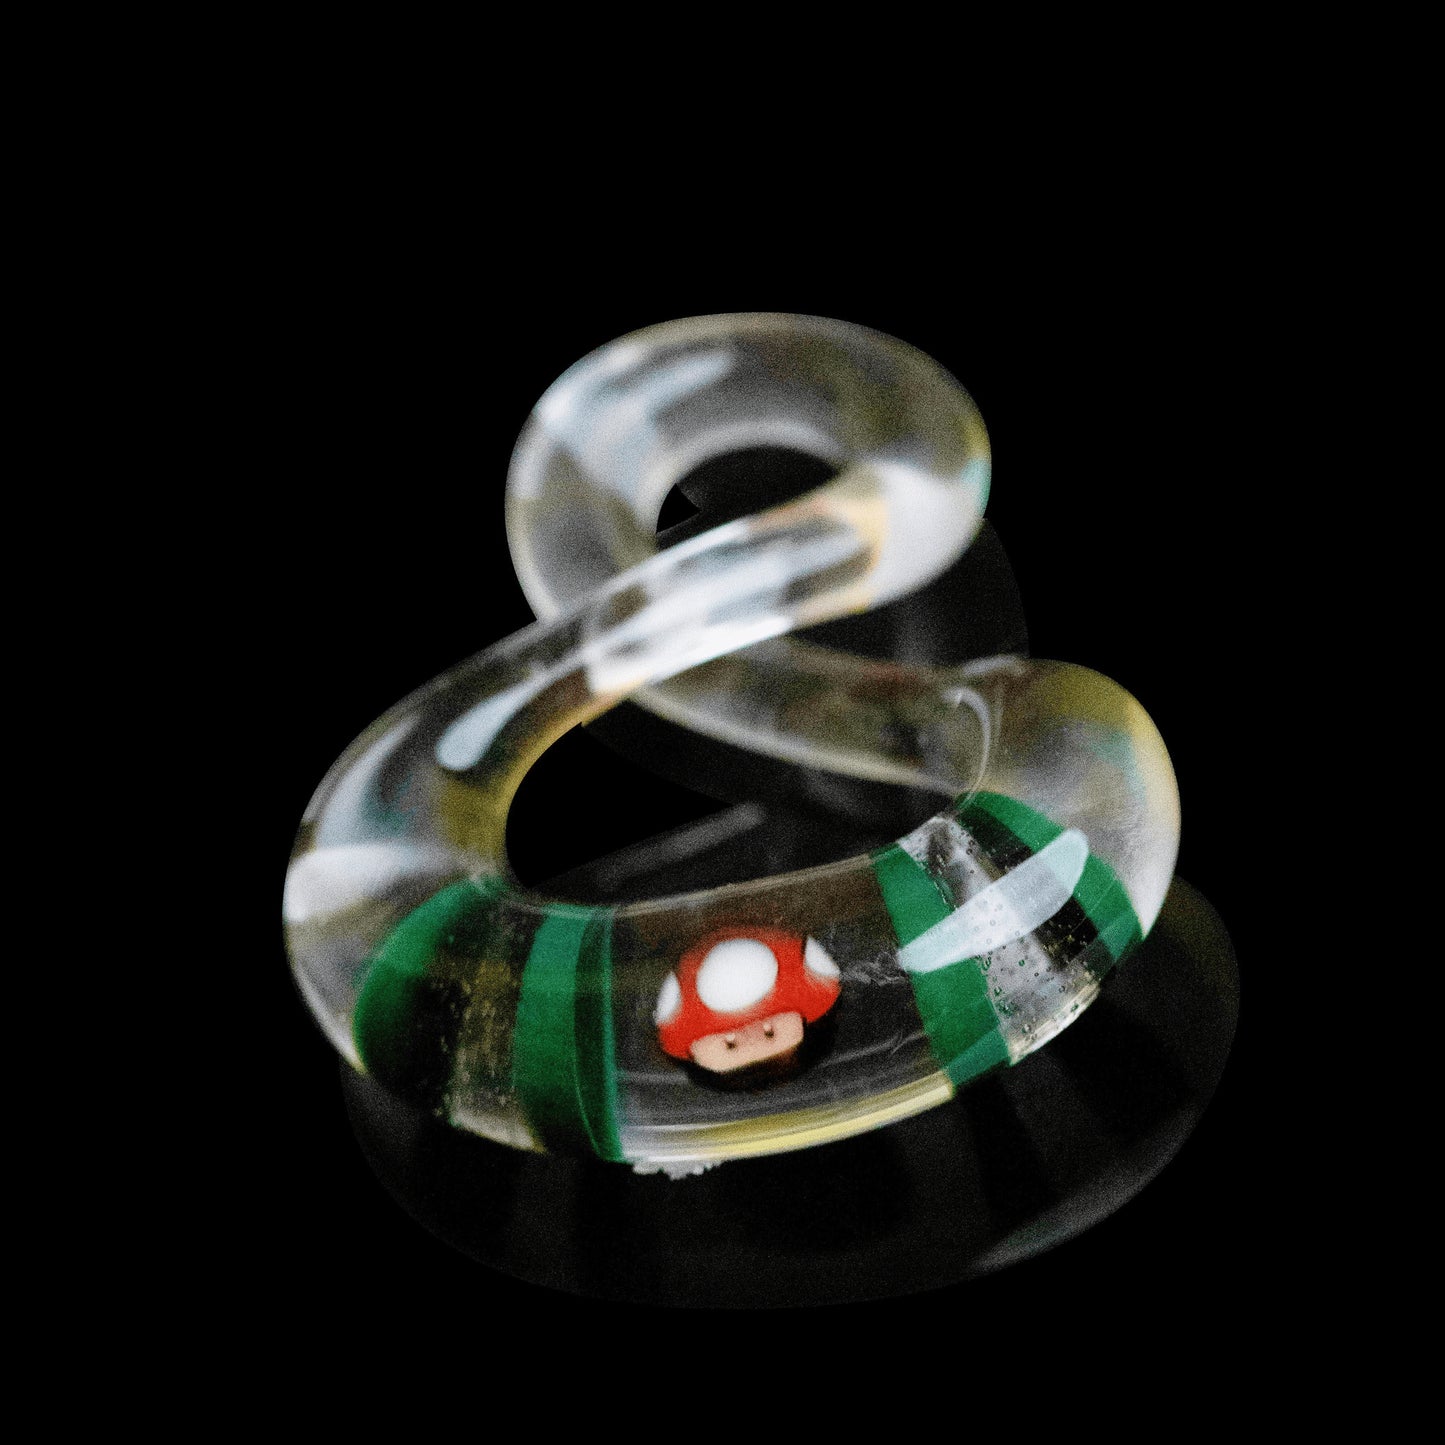 sophisticated glass pendant - Full Size Infinity Pendant (A) by NateyLove (2021)